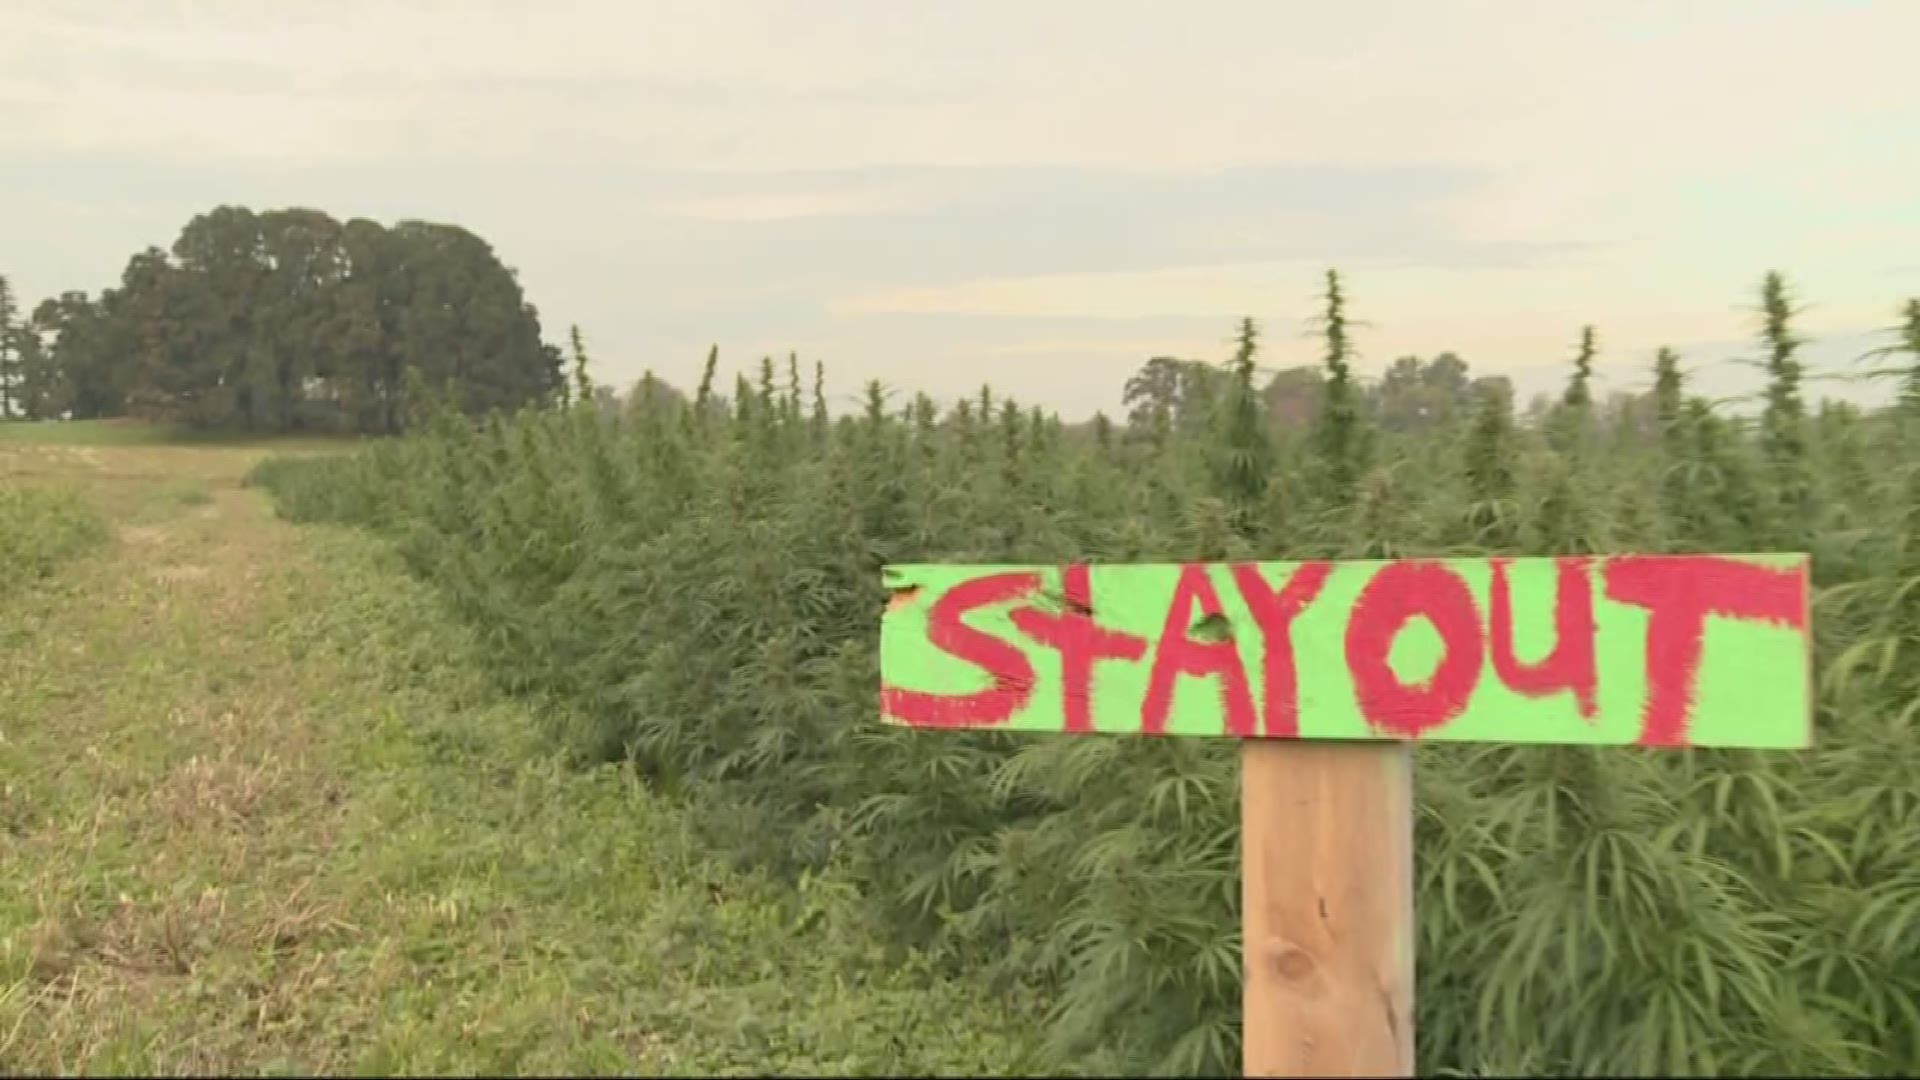 Pumpkins and corn aren’t the only things growing on Sauvie Island. Oregon farmers are growing more hemp there as well.